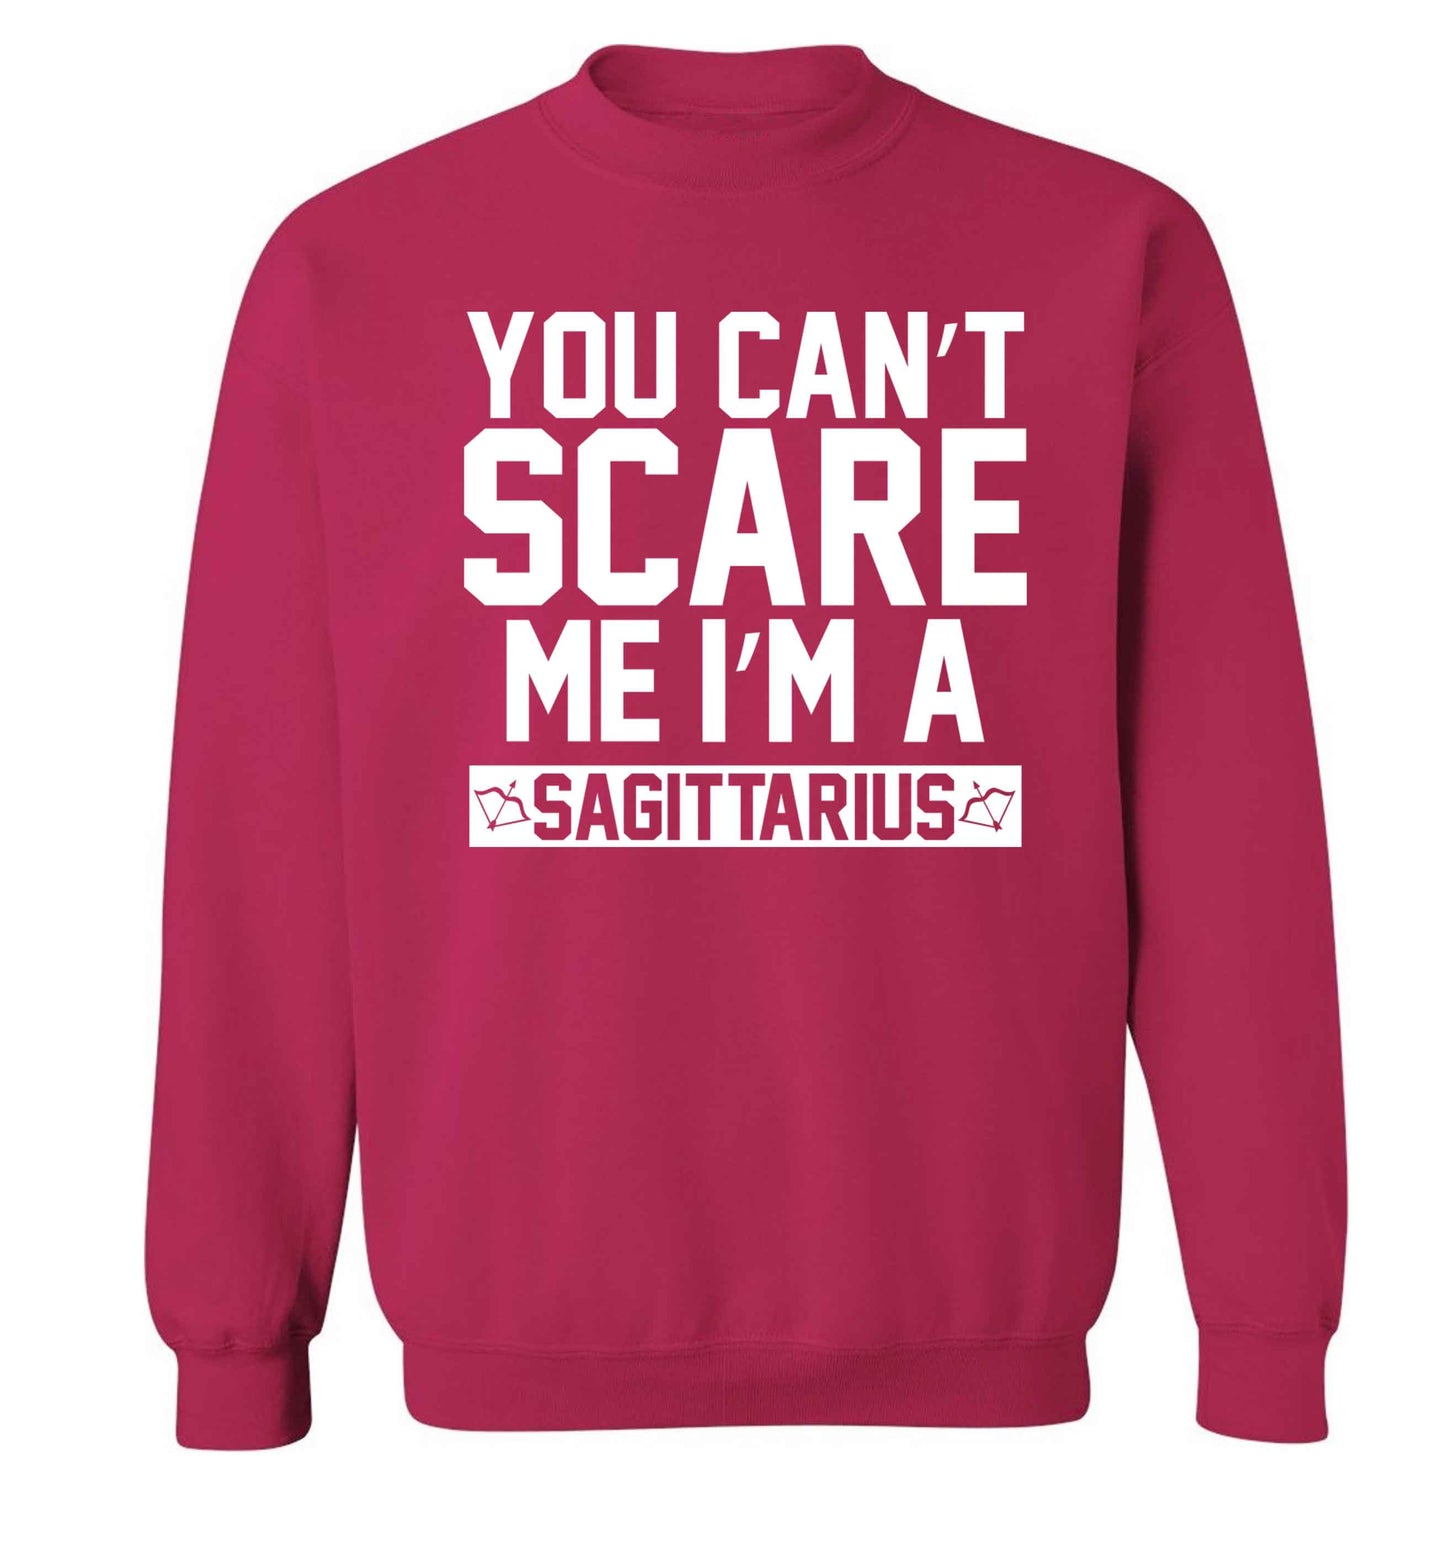 You can't scare me I'm a sagittarius Adult's unisex pink Sweater 2XL